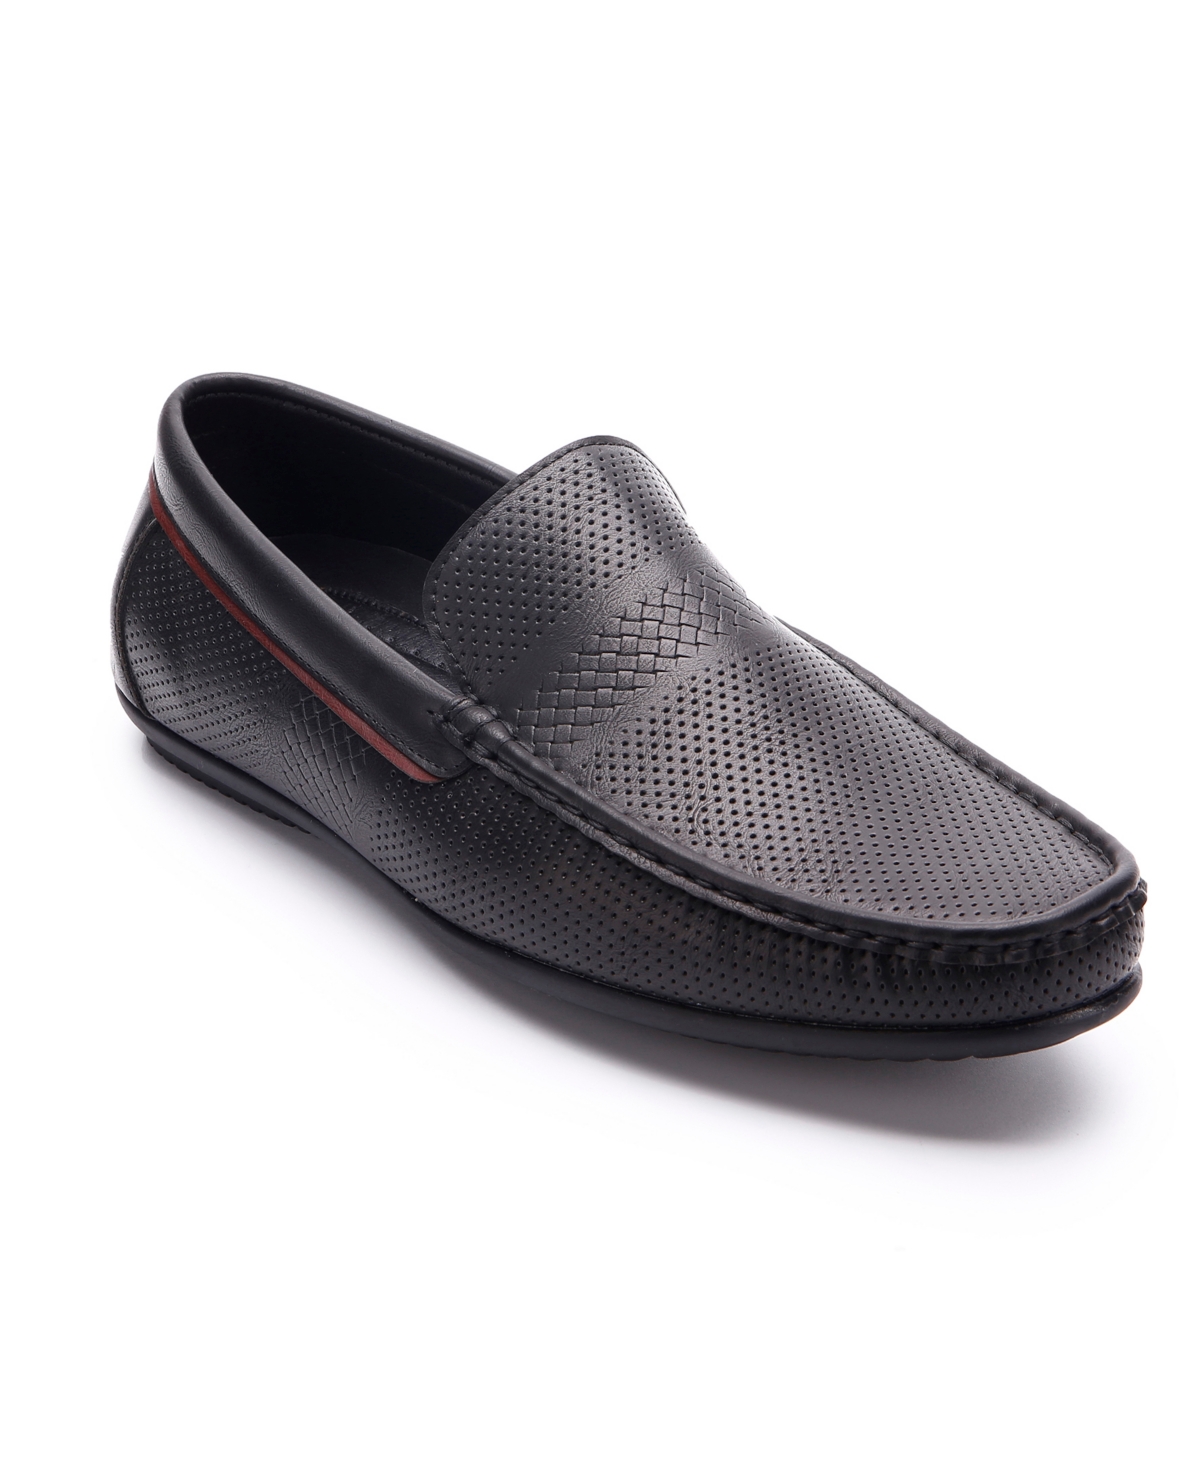 Men's Perforated Driving Shoes - Black